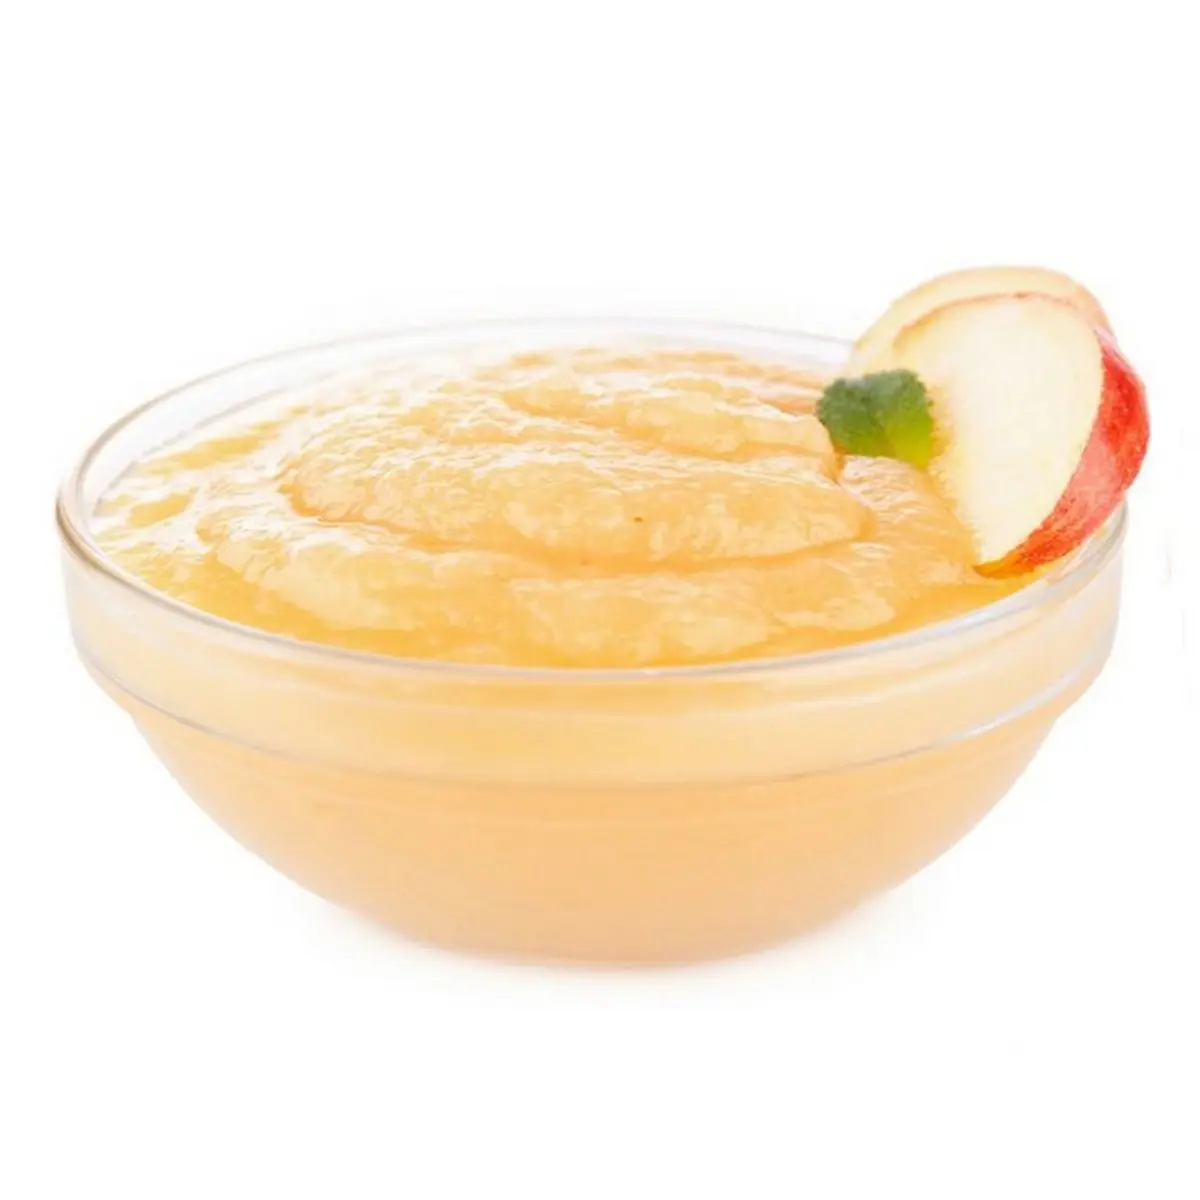 Apple puree canned in an aseptic way Brix 36-38% Application Confectionery industry, Ice cream wholesale prices